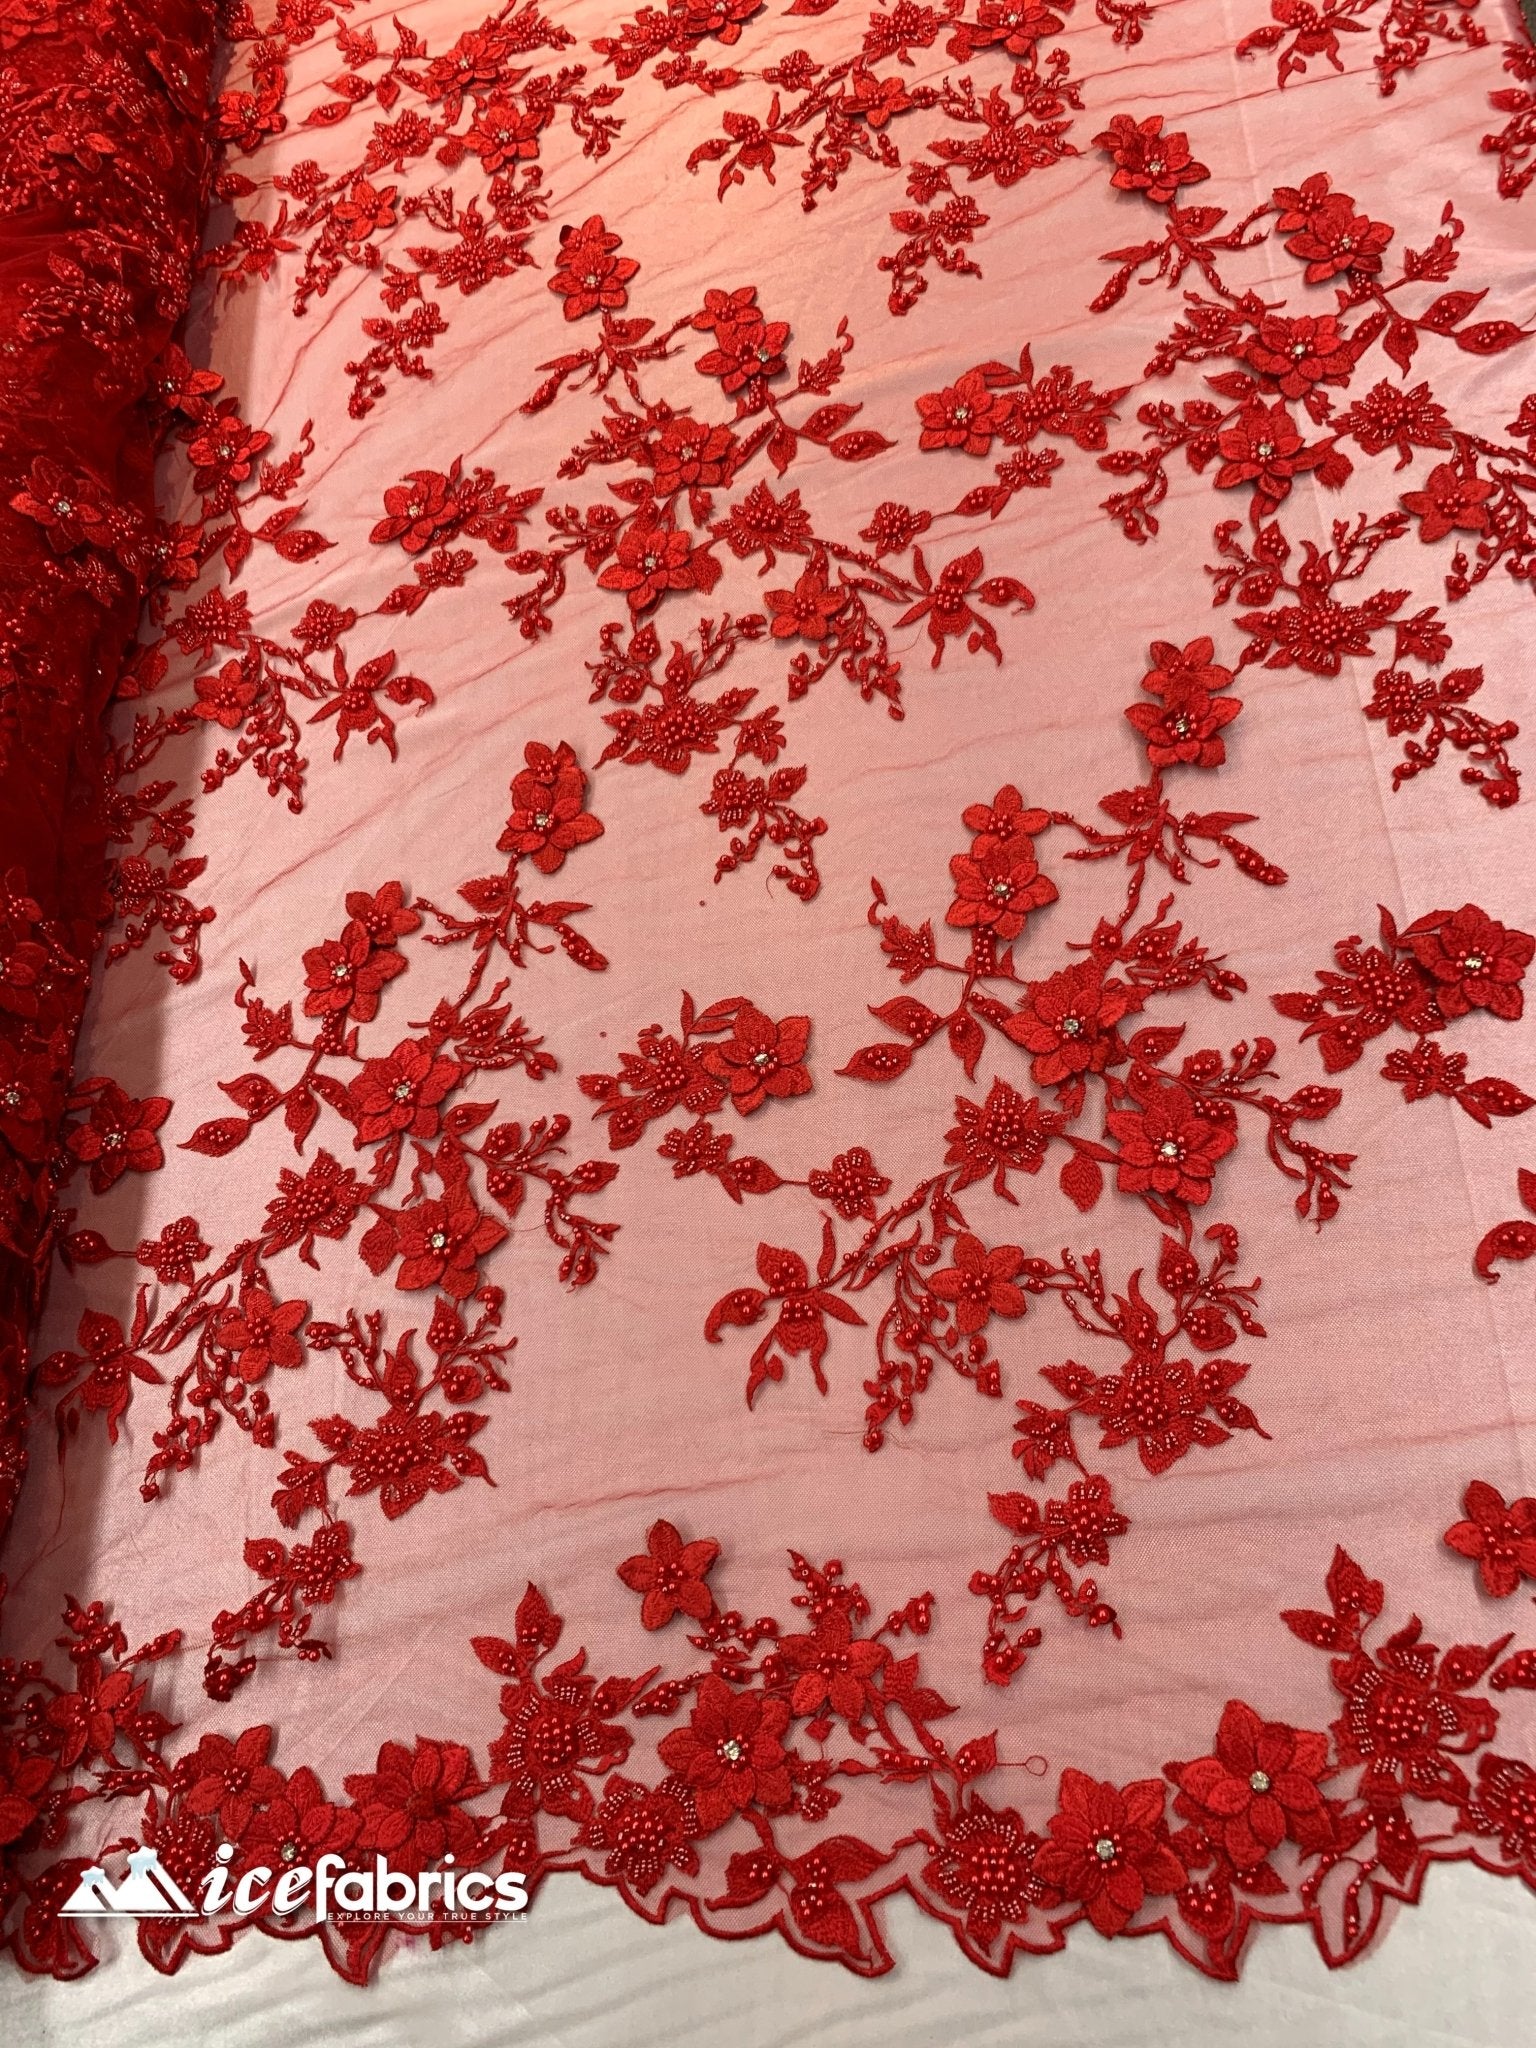 Embroidered Fabric/ 3D Flowers Beaded Fabric/ Lace Fabric/ RedICE FABRICSICE FABRICSRedEmbroidered Fabric/ 3D Flowers Beaded Fabric/ Lace Fabric/ Red ICE FABRICS